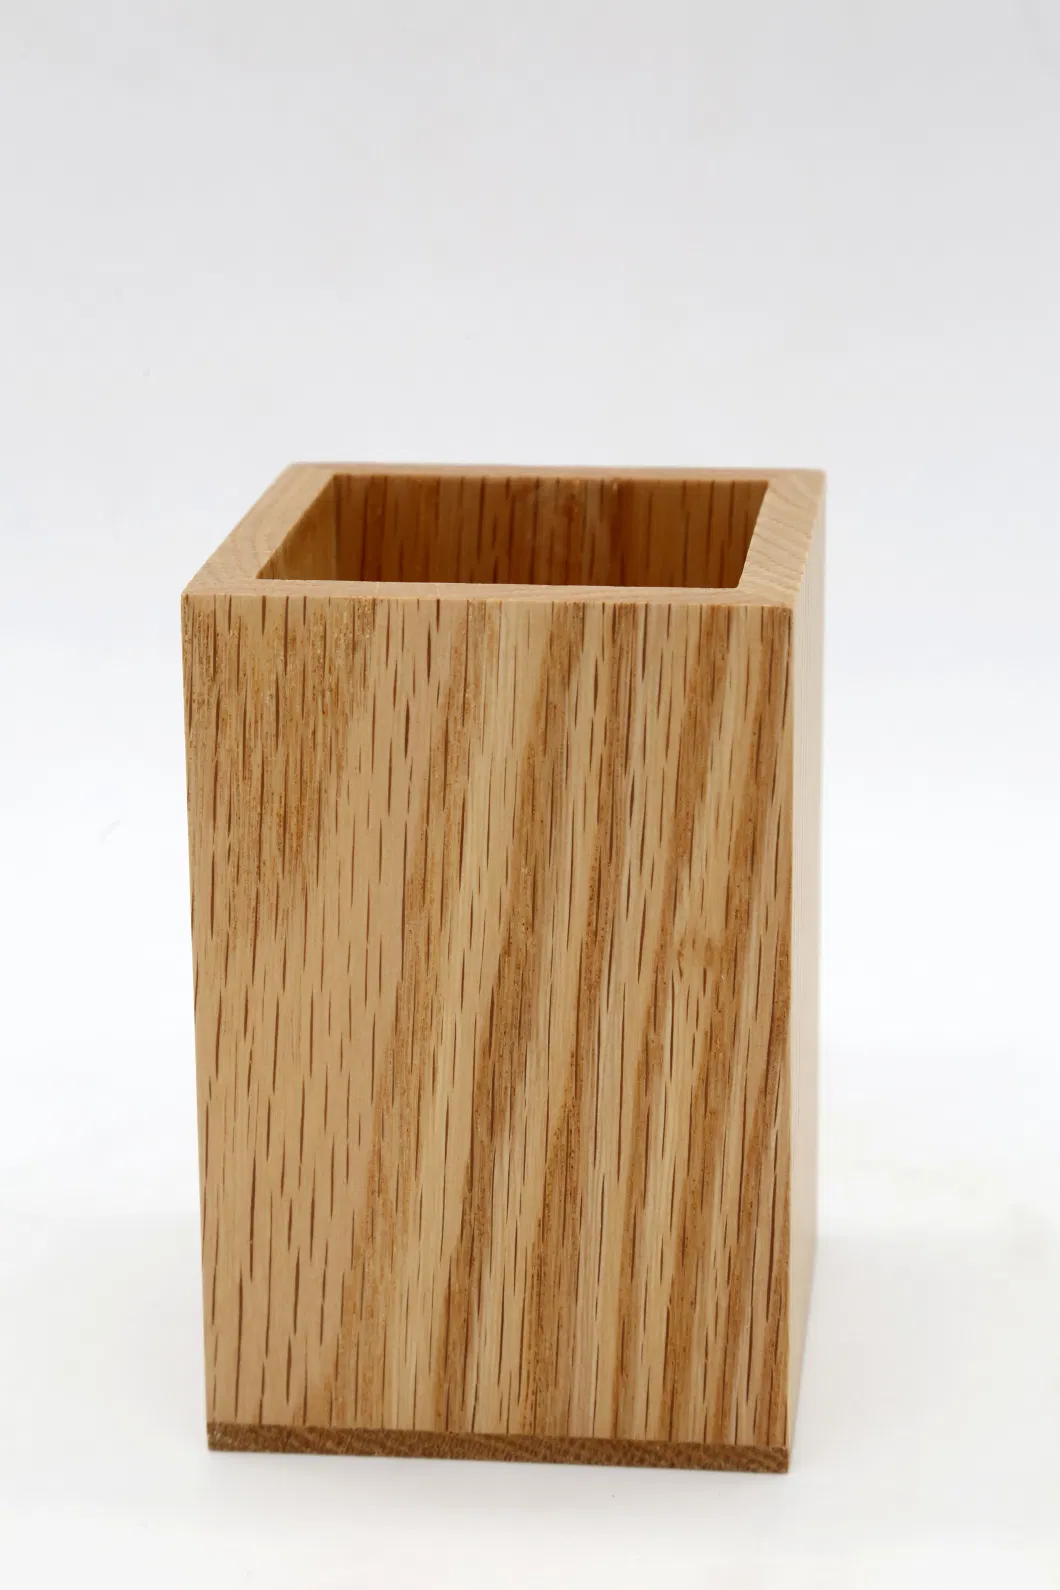 Fully Clear Varnished Beautifully Handmade Oak Wooden Gift Box